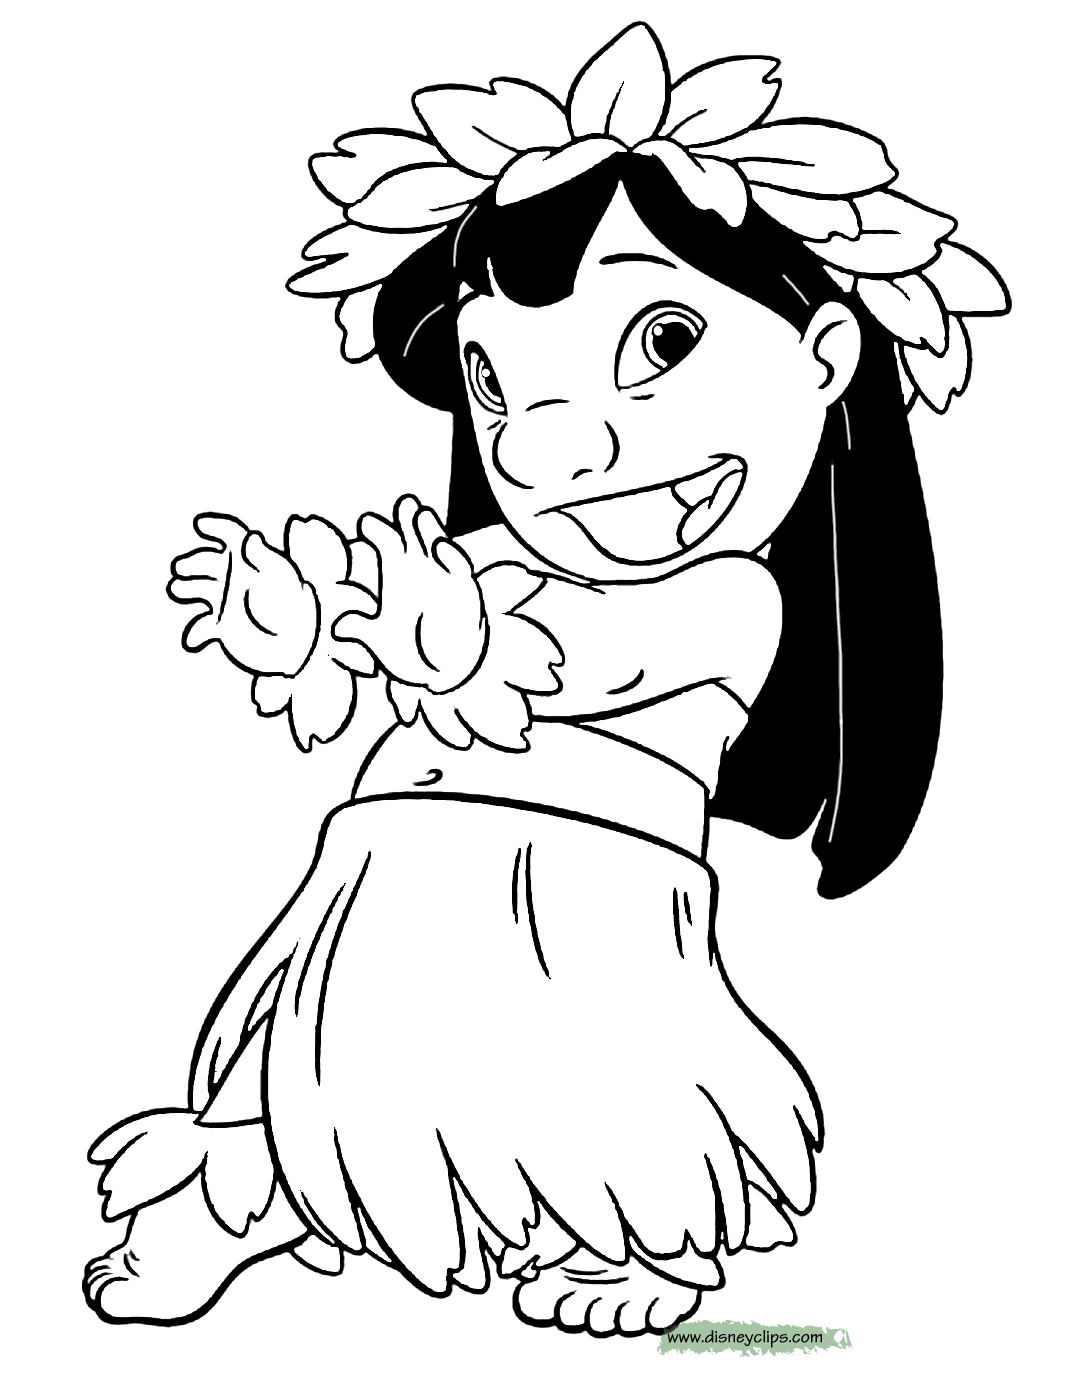 Disney Lilo And Stitch Coloring Pages Lilo And Stitch Coloring Pages